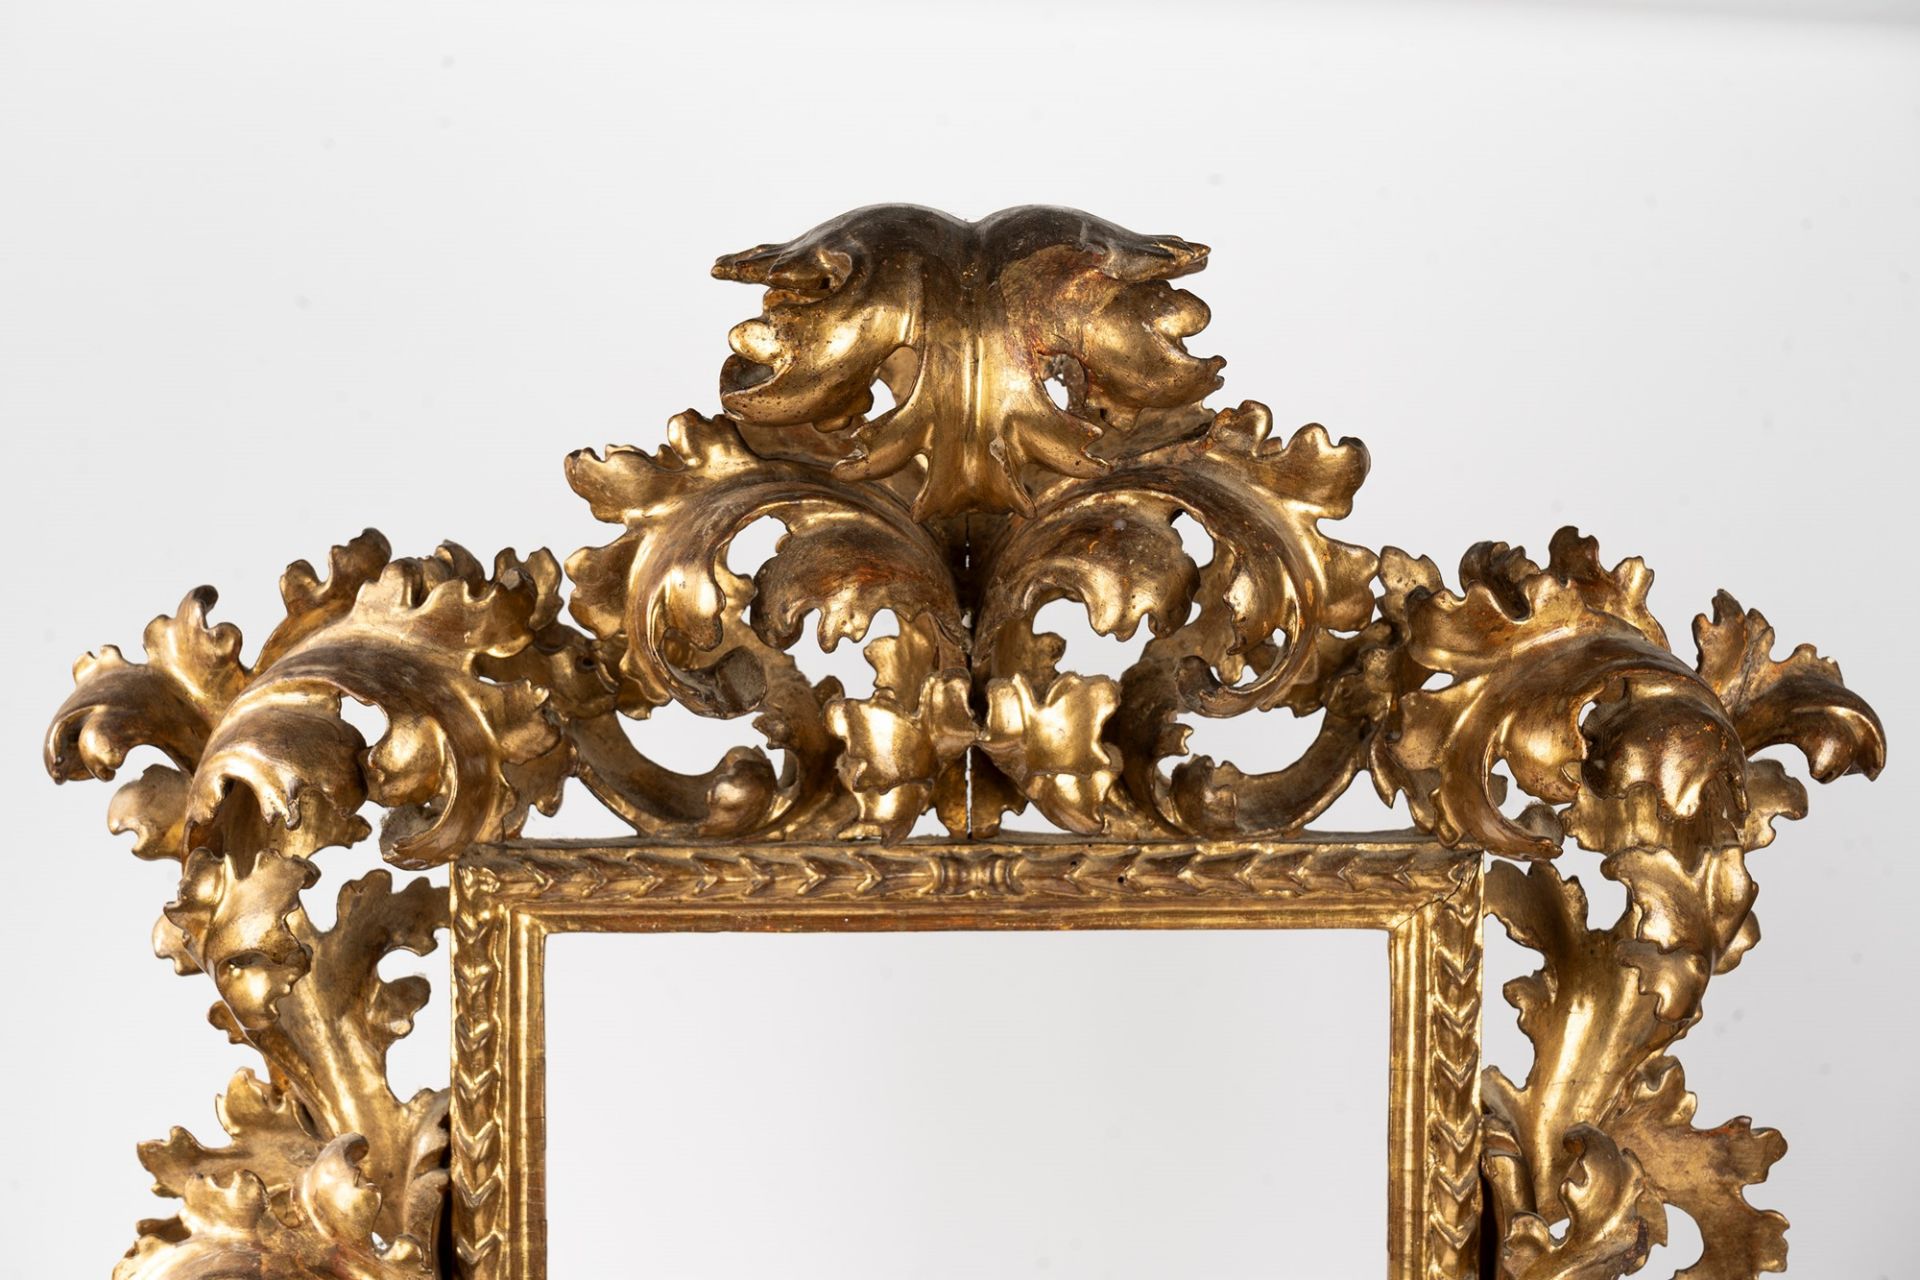 Carved and gilded wood frame, 19th century - Image 3 of 7